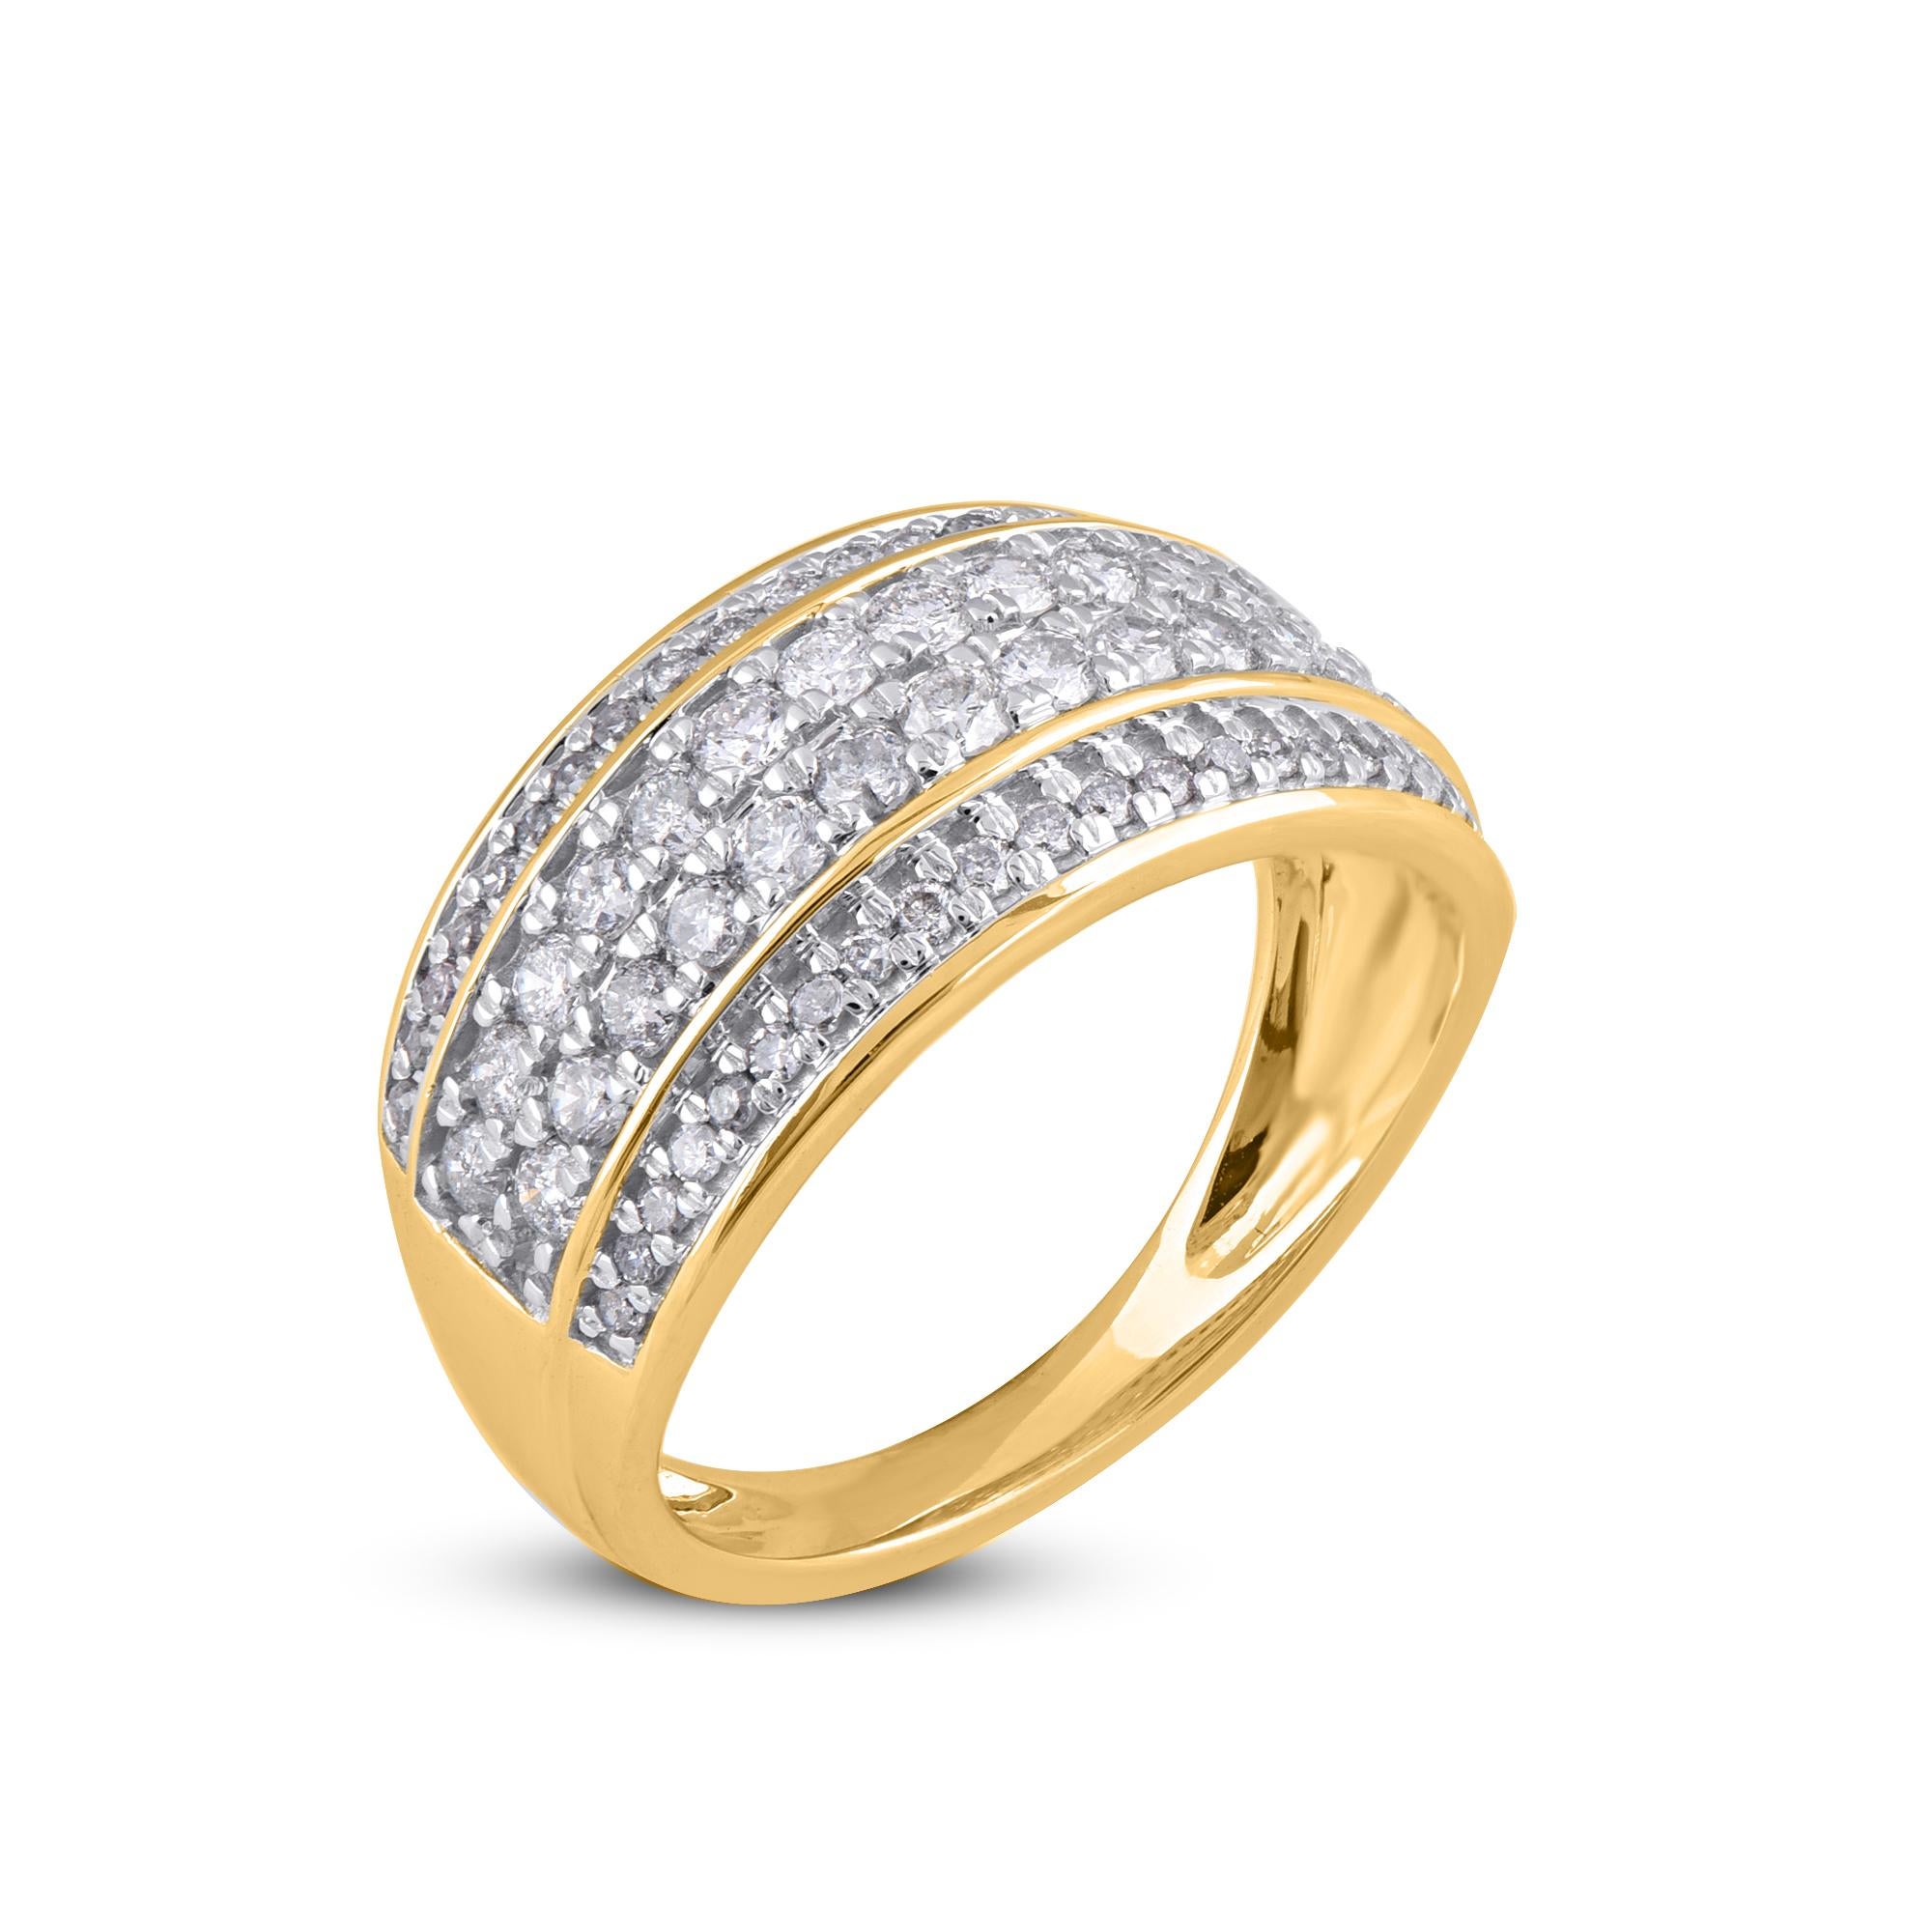 Unique yet timeless designer diamond studded ring to make you feel special and stand-out. Made by our skillful craftsmen in 14 karat yellow gold and studded with 102 brilliant cut and single cut diamond in pave setting. The total diamond weight is